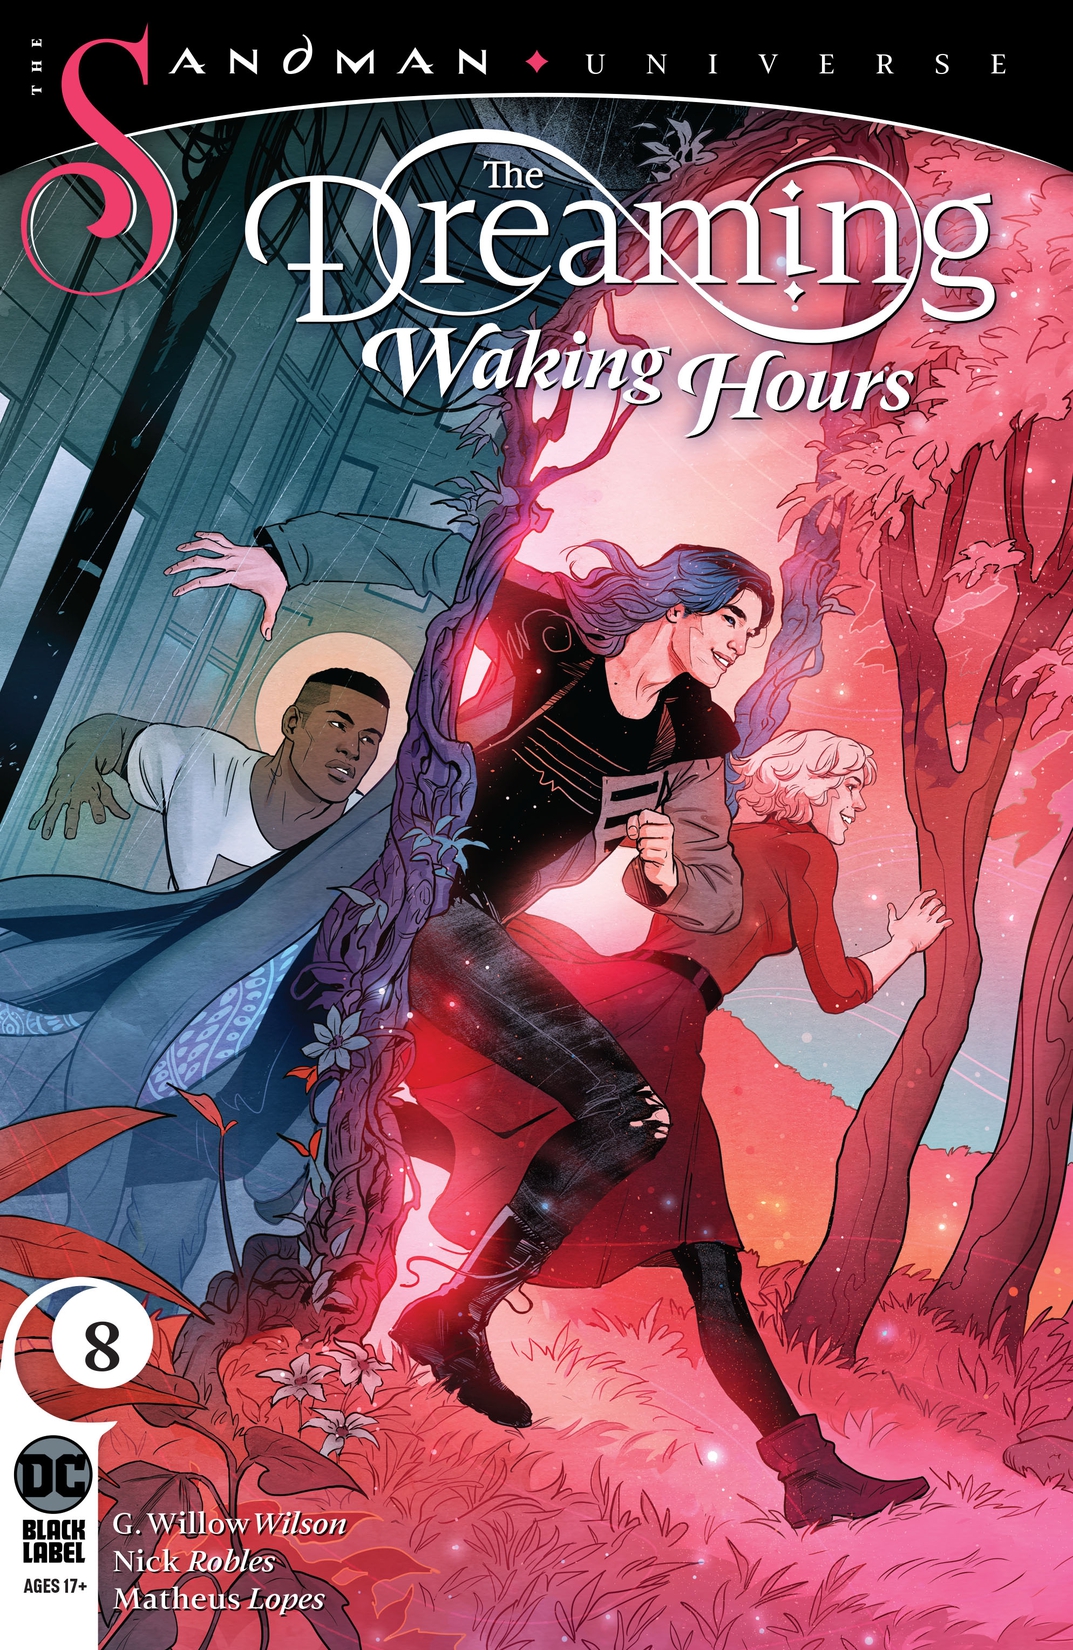 The Dreaming: Waking Hours #8 preview images